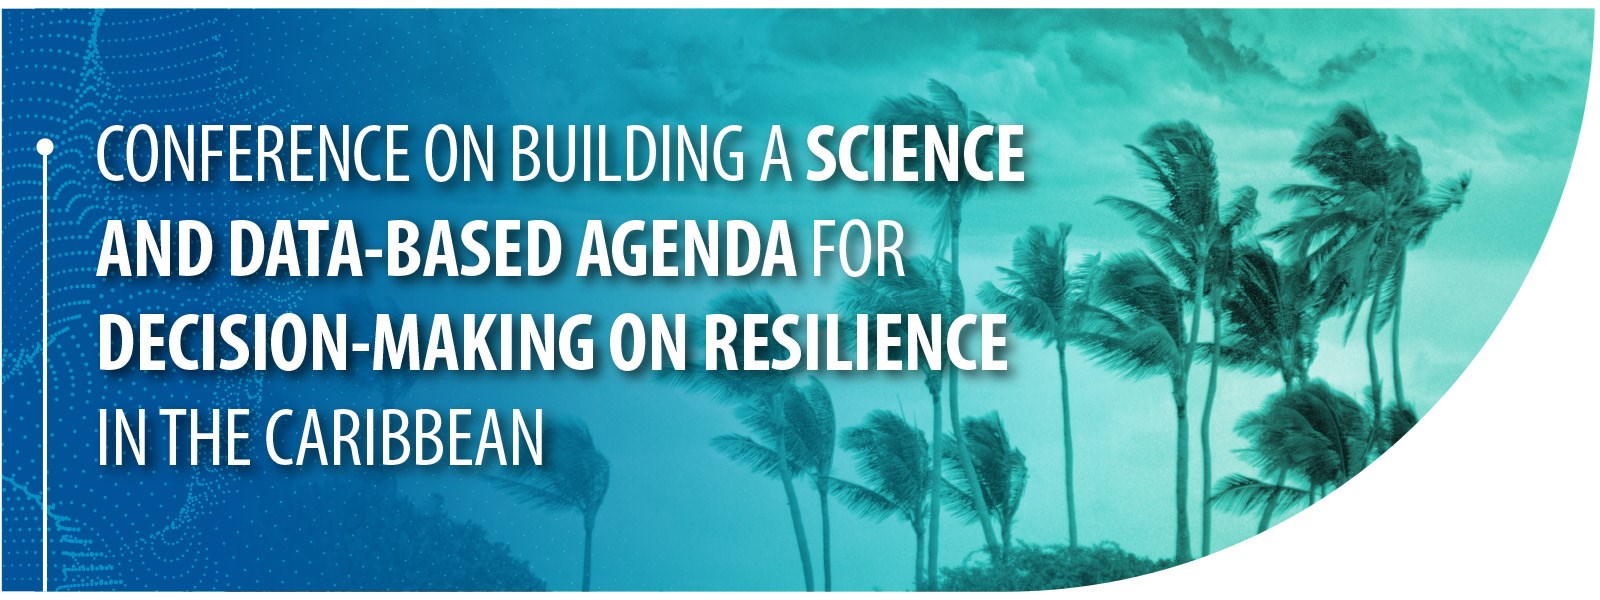 Conference on Building a Science and Data-Based Agenda for Decision-Making on Resilience in the Caribbean